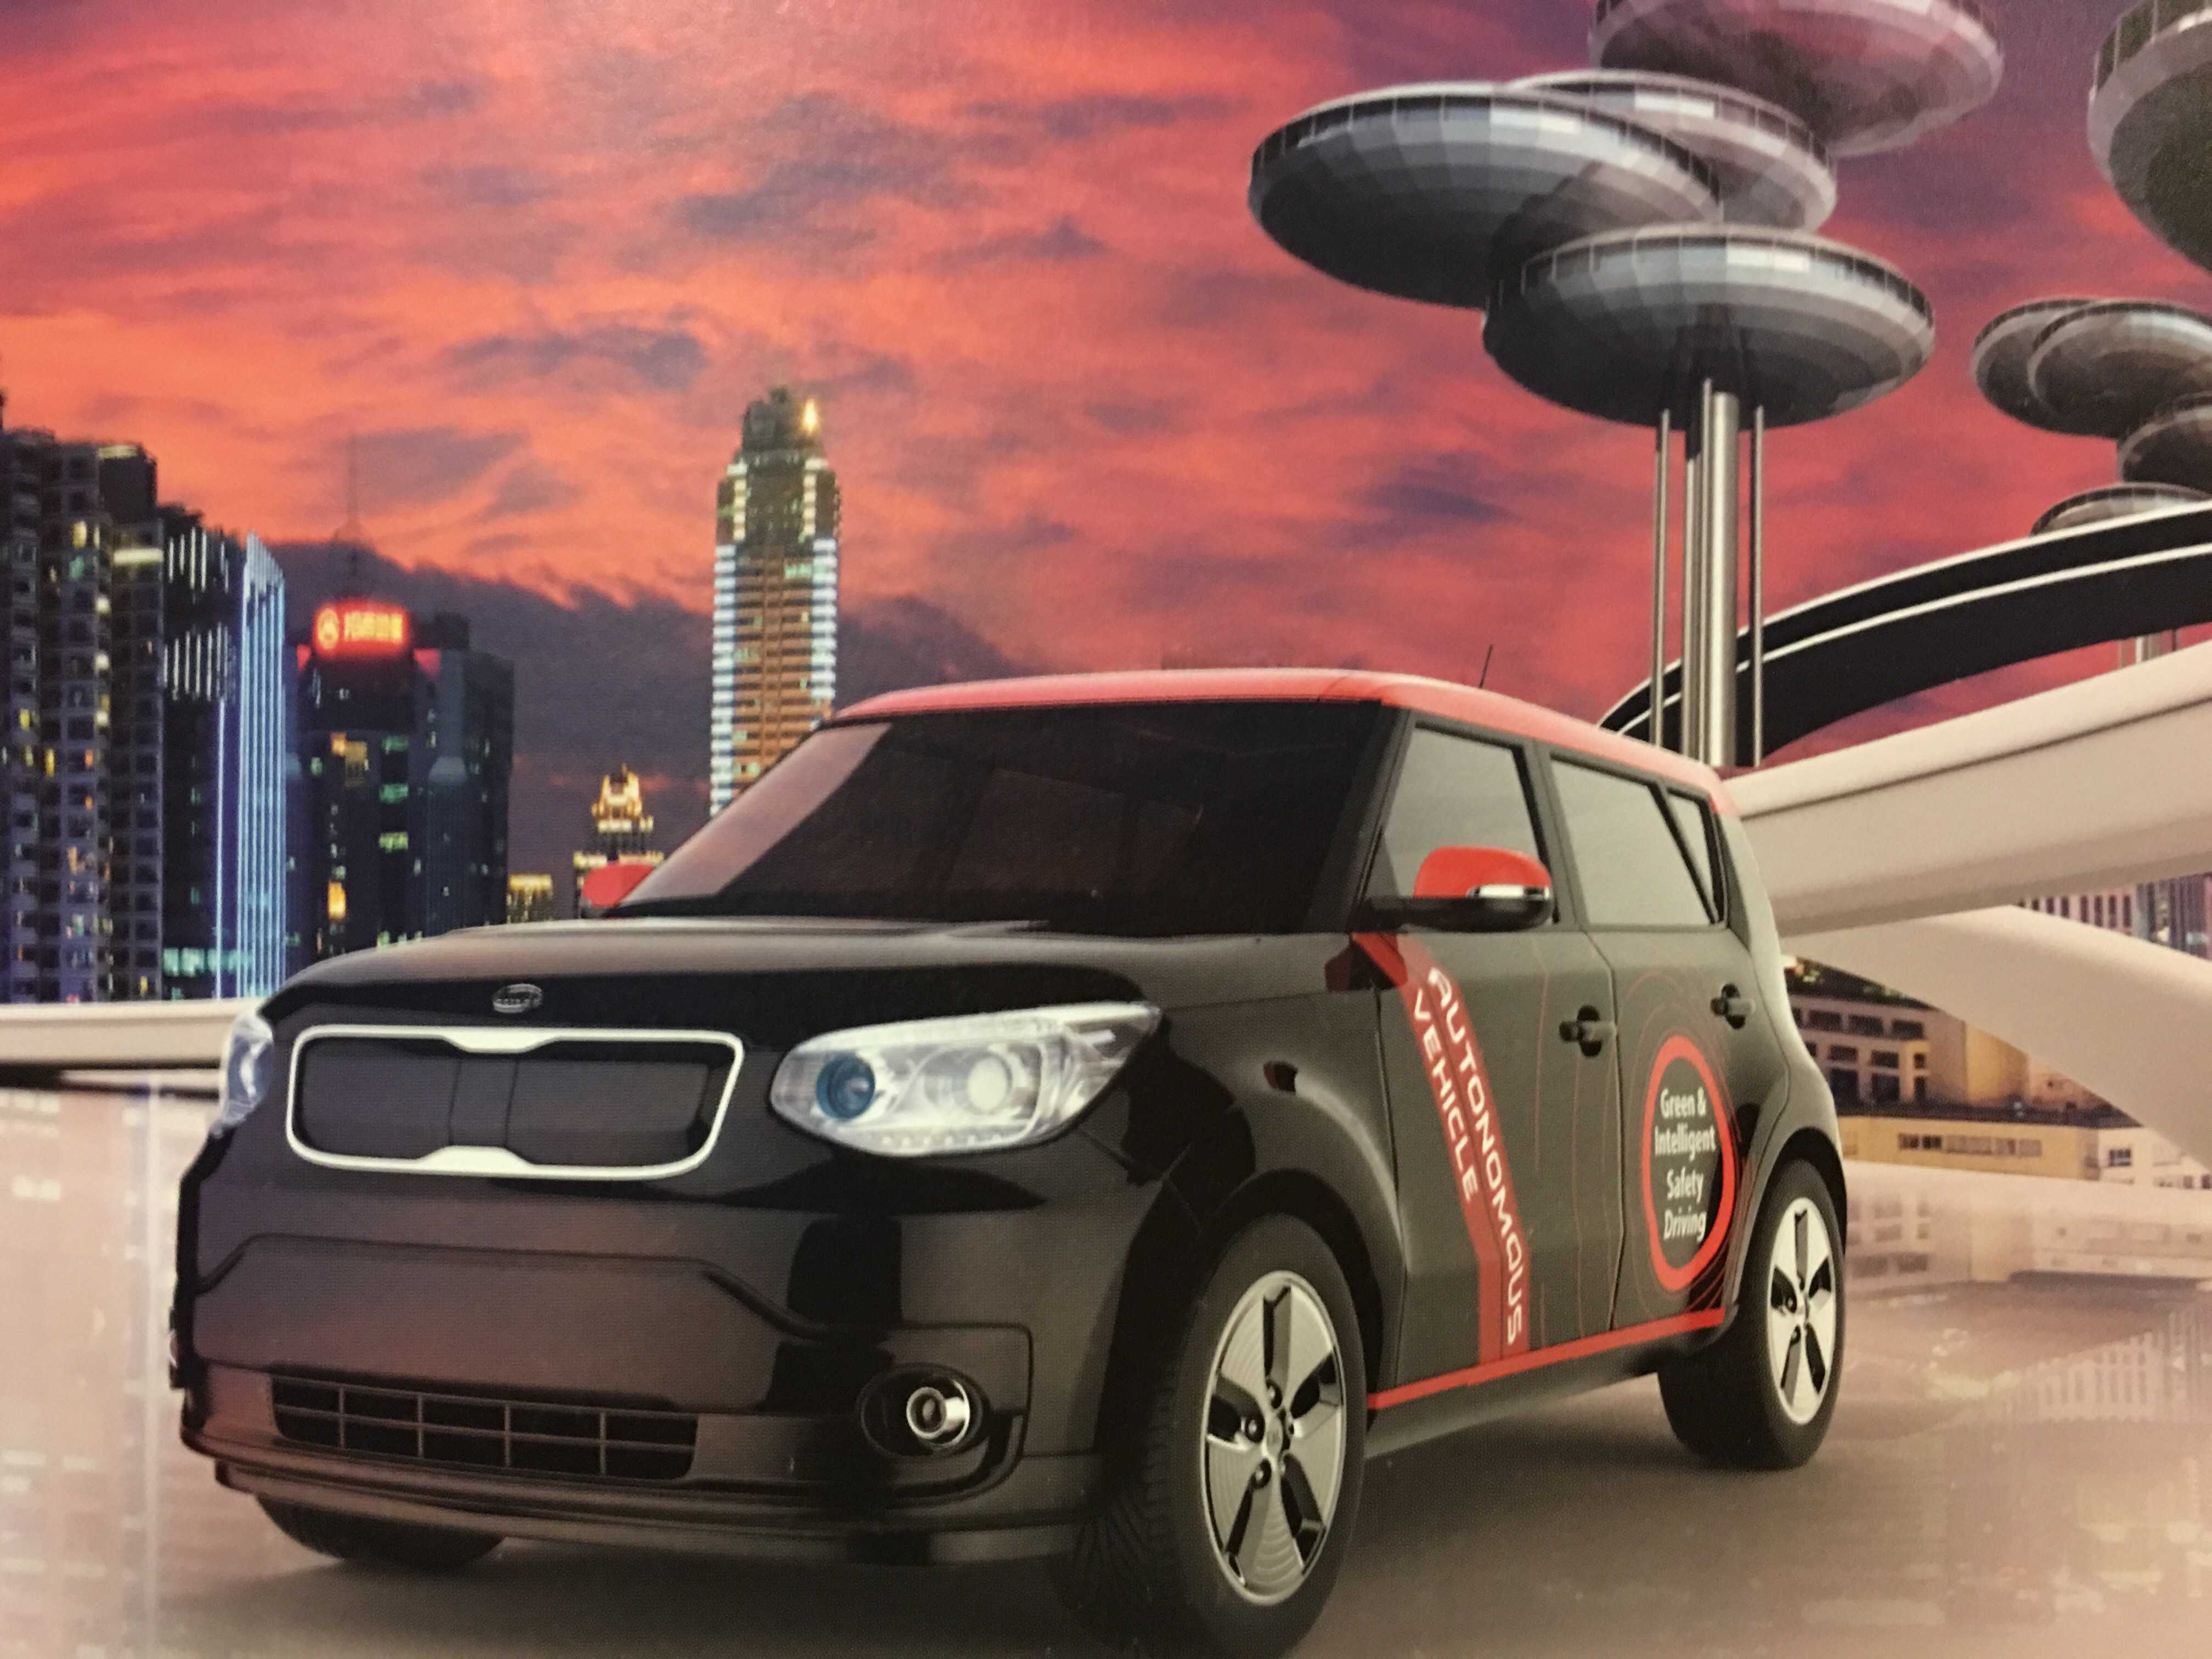 Kia's concept for a fully autonomous car, which we'll all NOT be driving in 2030. Plus, we'll all be living in gleaming Sky Discs.